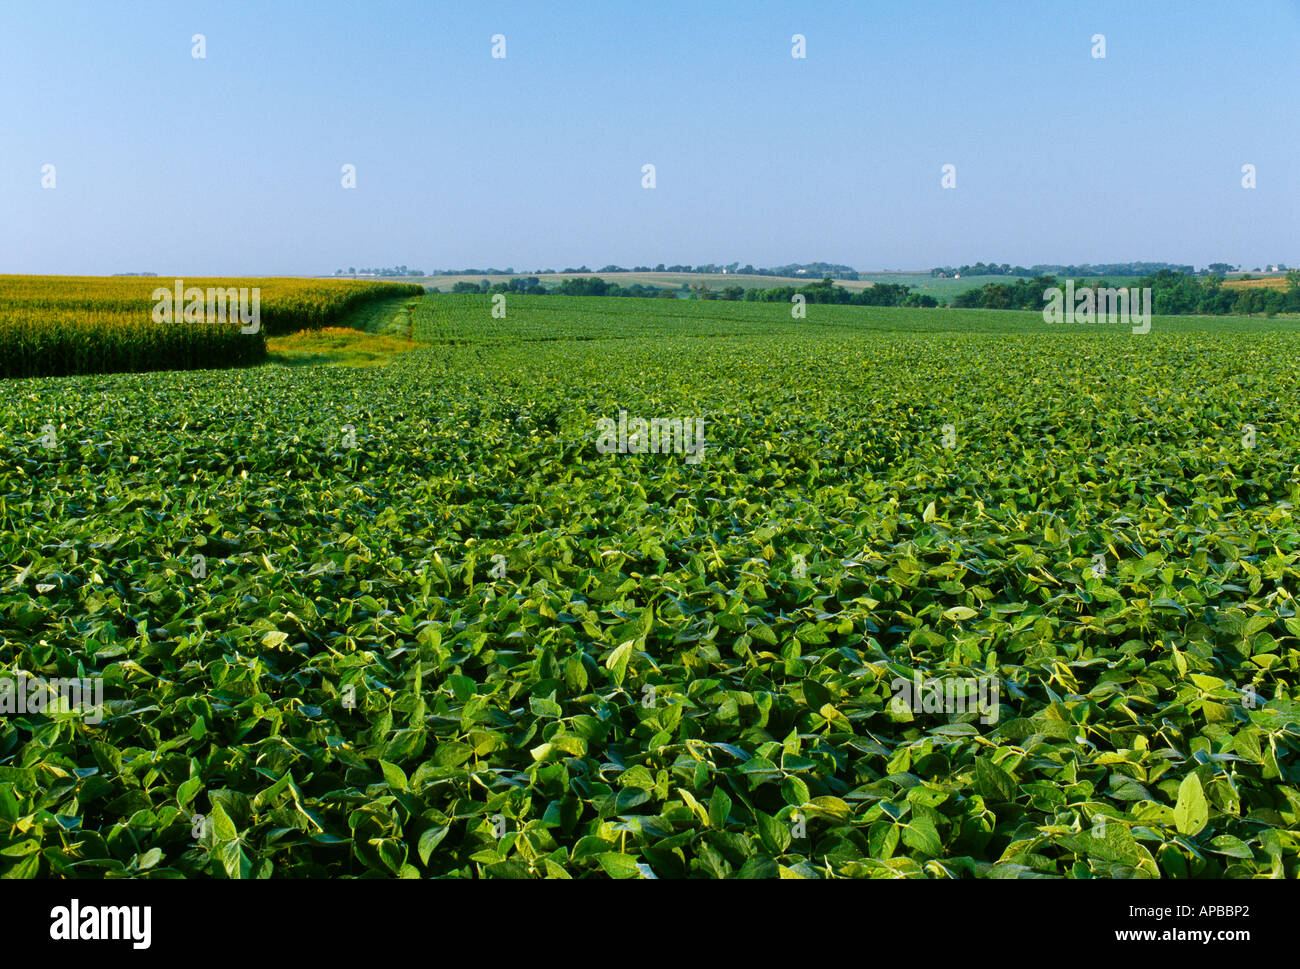 Agriculture - Field of mid growth soybeans in hazy morning light with a grain corn field on the left / Iowa, USA. Stock Photo